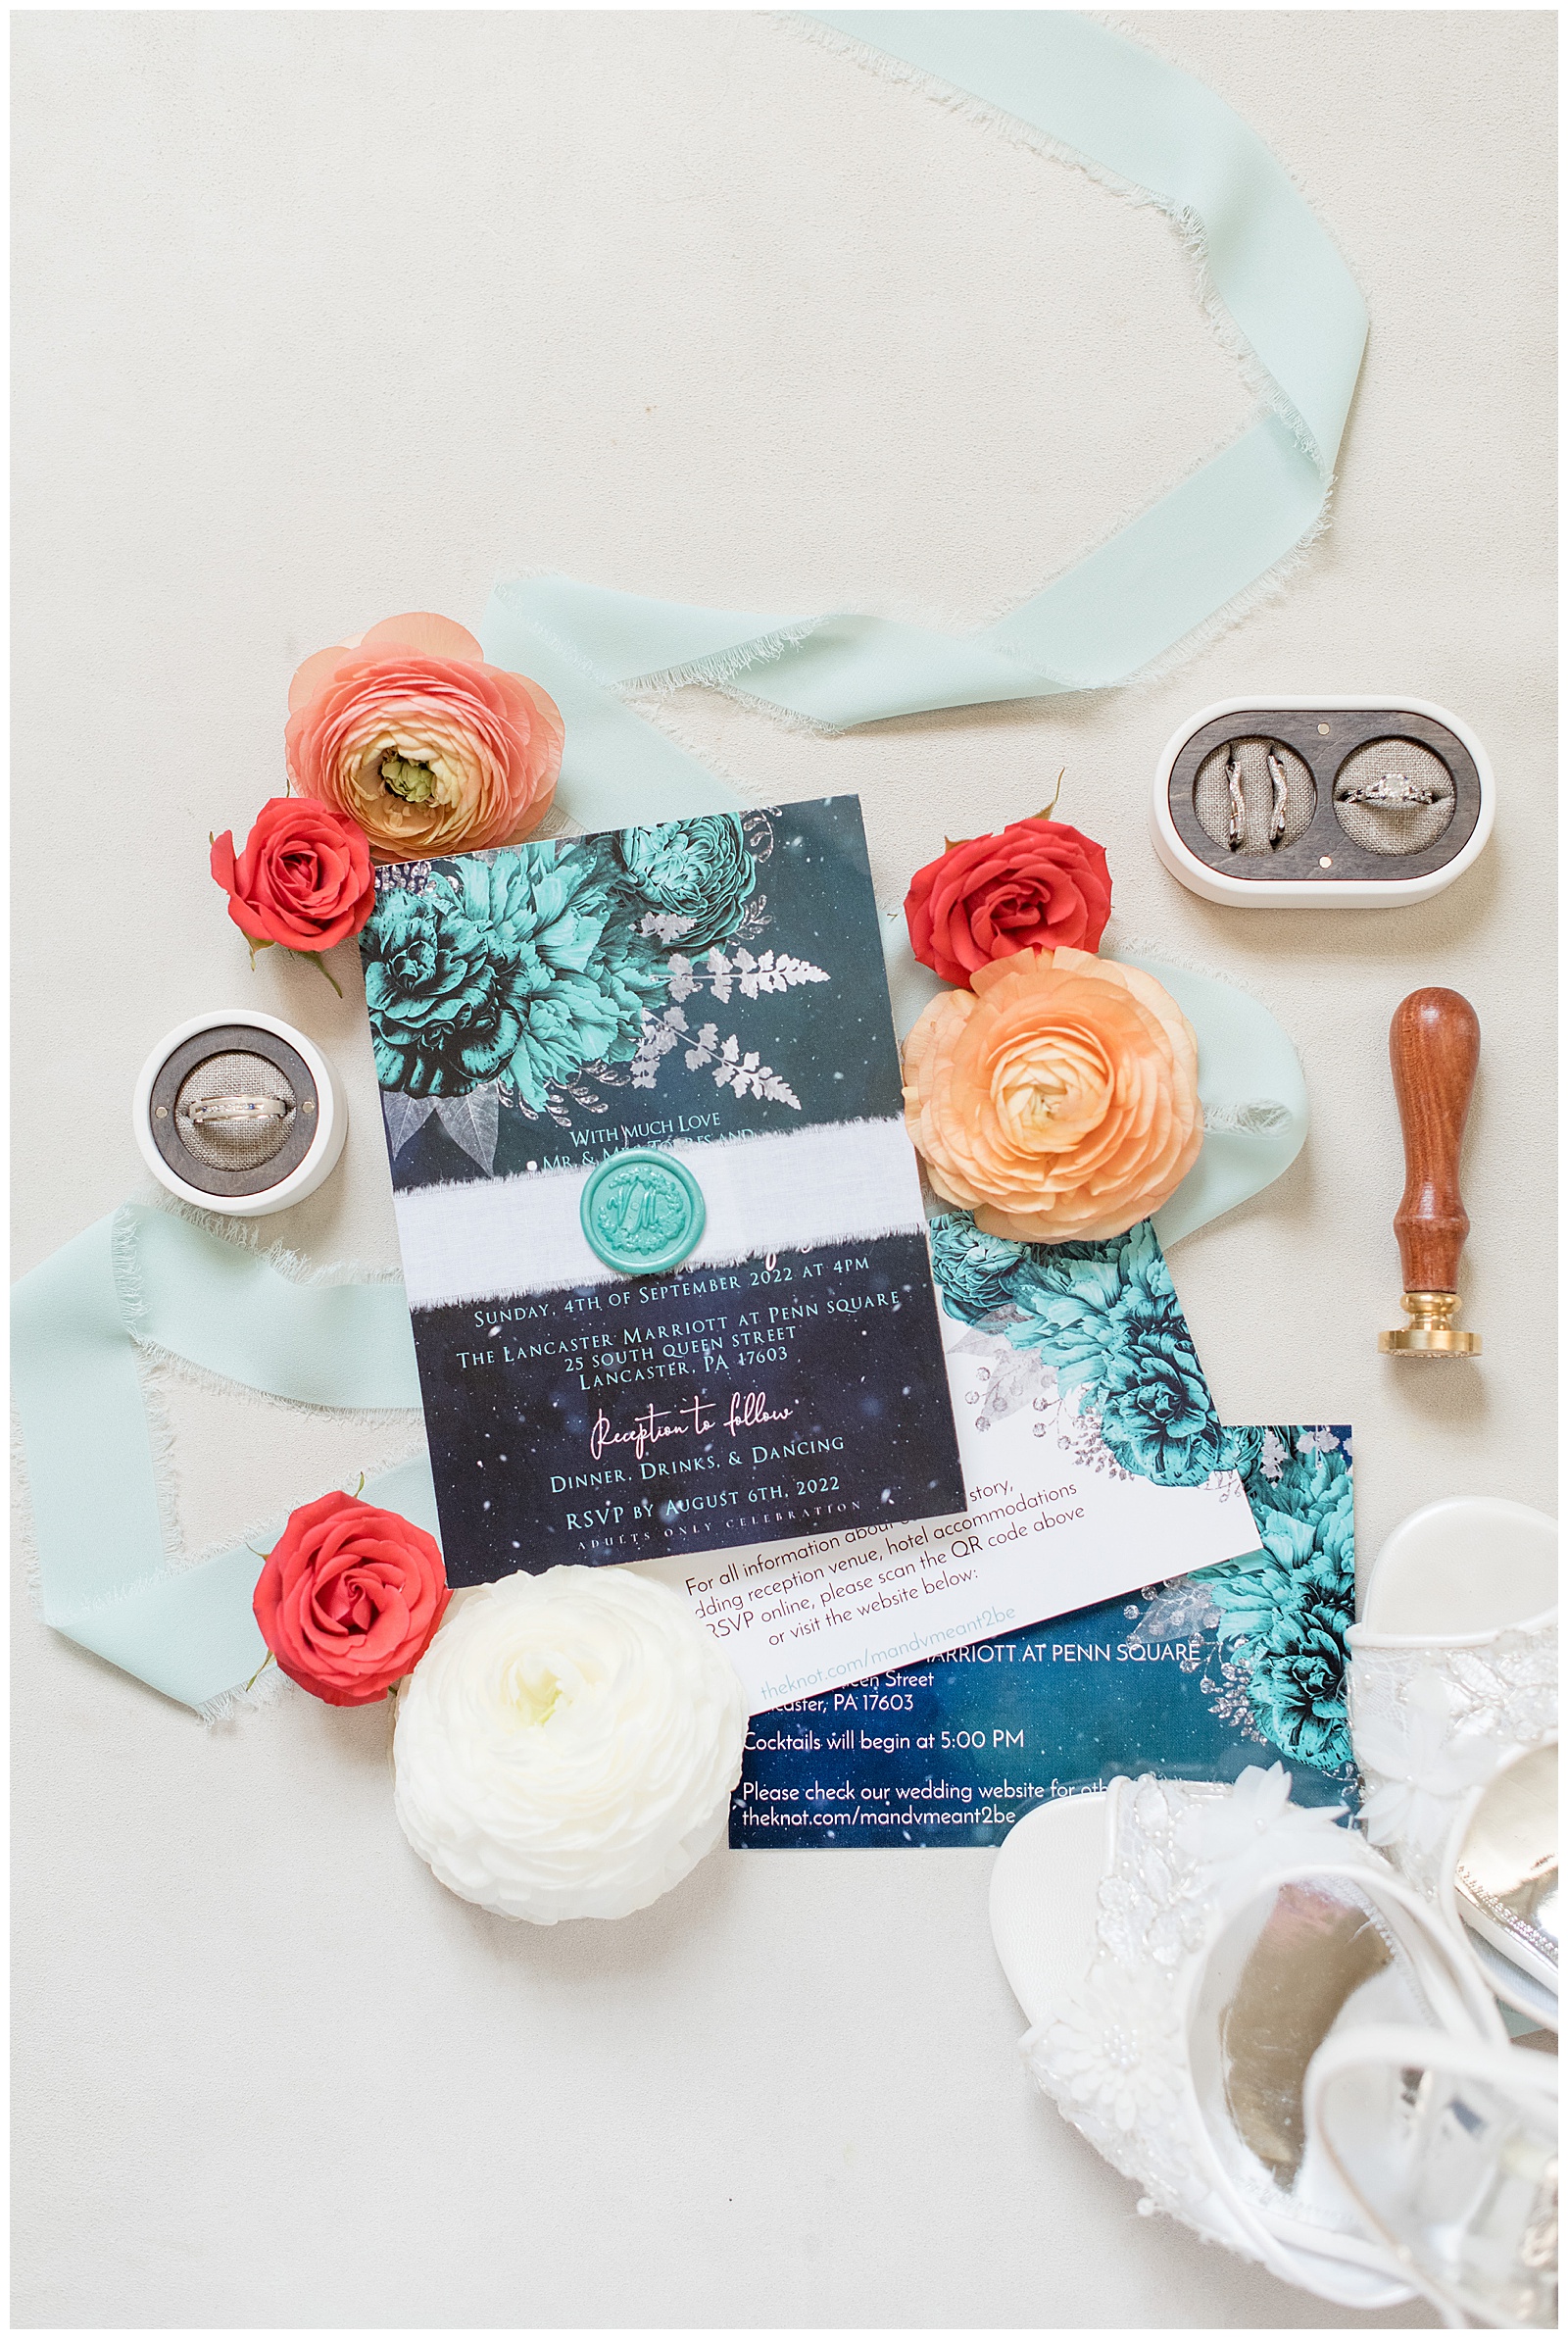 black wedding invitation with white and teal lettering surrounded by colorful ribbon, flowers, and wedding rings in cute display boxes in lancaster pa